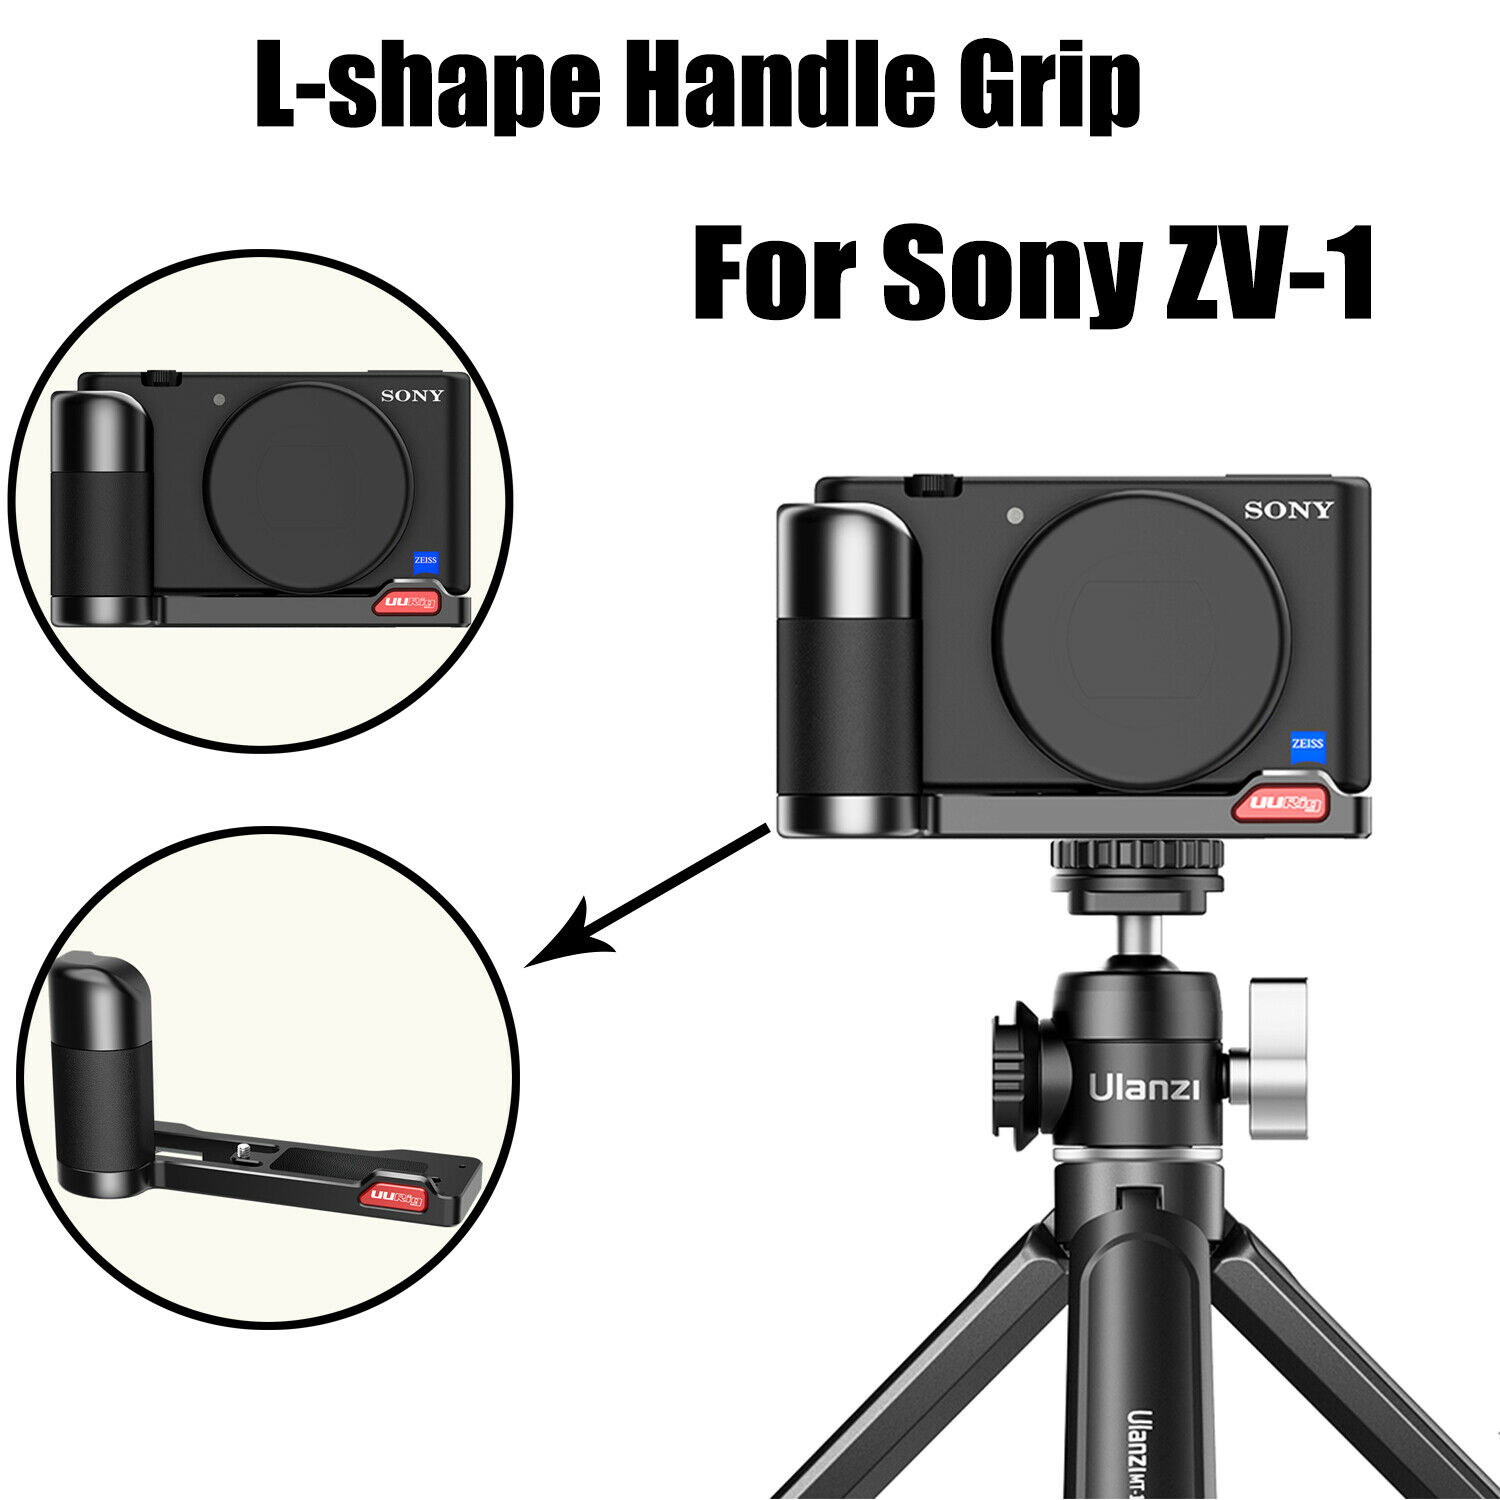 UURig-R055-Camera-L-shape-Handle-Grip-Vlog-Microphone-Video-for-Sony-ZV-1-1749836